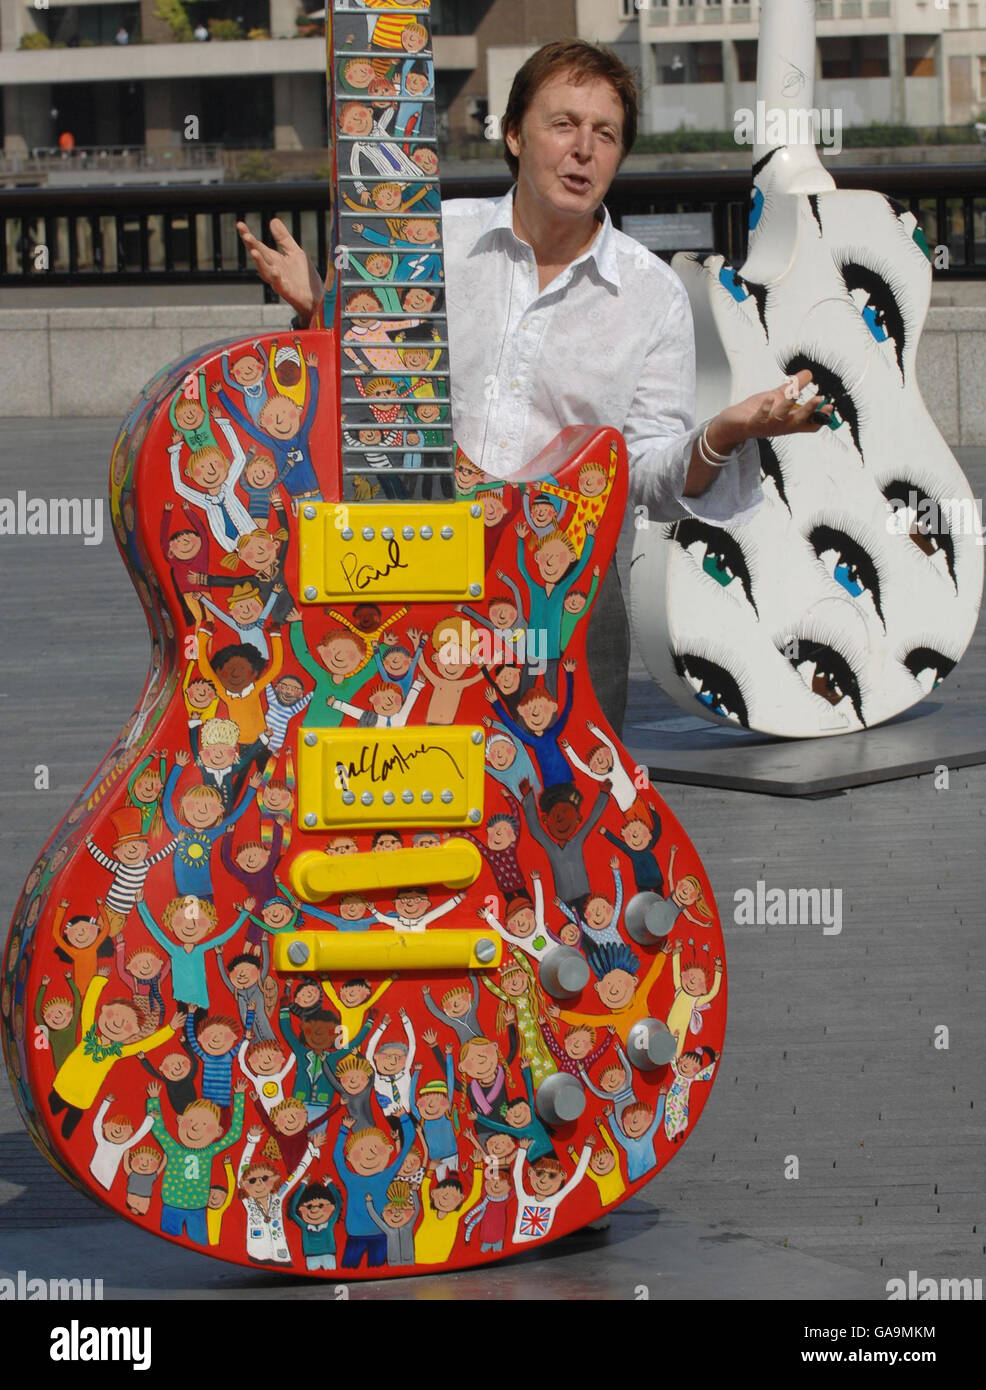 Sir Paul McCartney signs a 10ft high Les Paul Guitar sculpture in central  London, painted by artist Rosie Brooks, which forms part of an exhibition  at London's City Hall. The guitar along